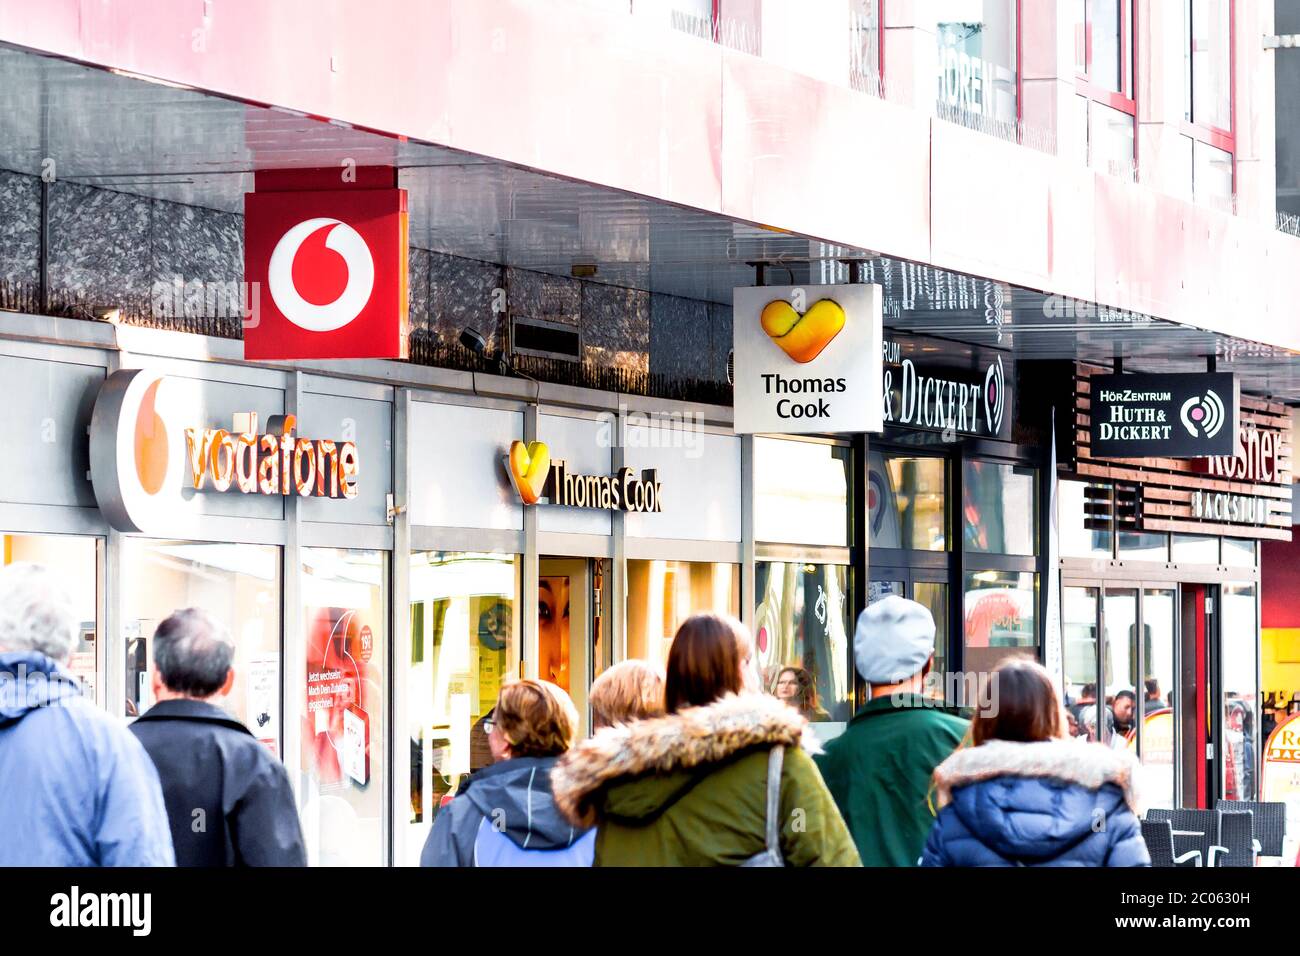 People in colorful jackets walking down the Eichhorn street. On the background is the shopwindow of the famous travel agents branch Thomas Cook. Stock Photo